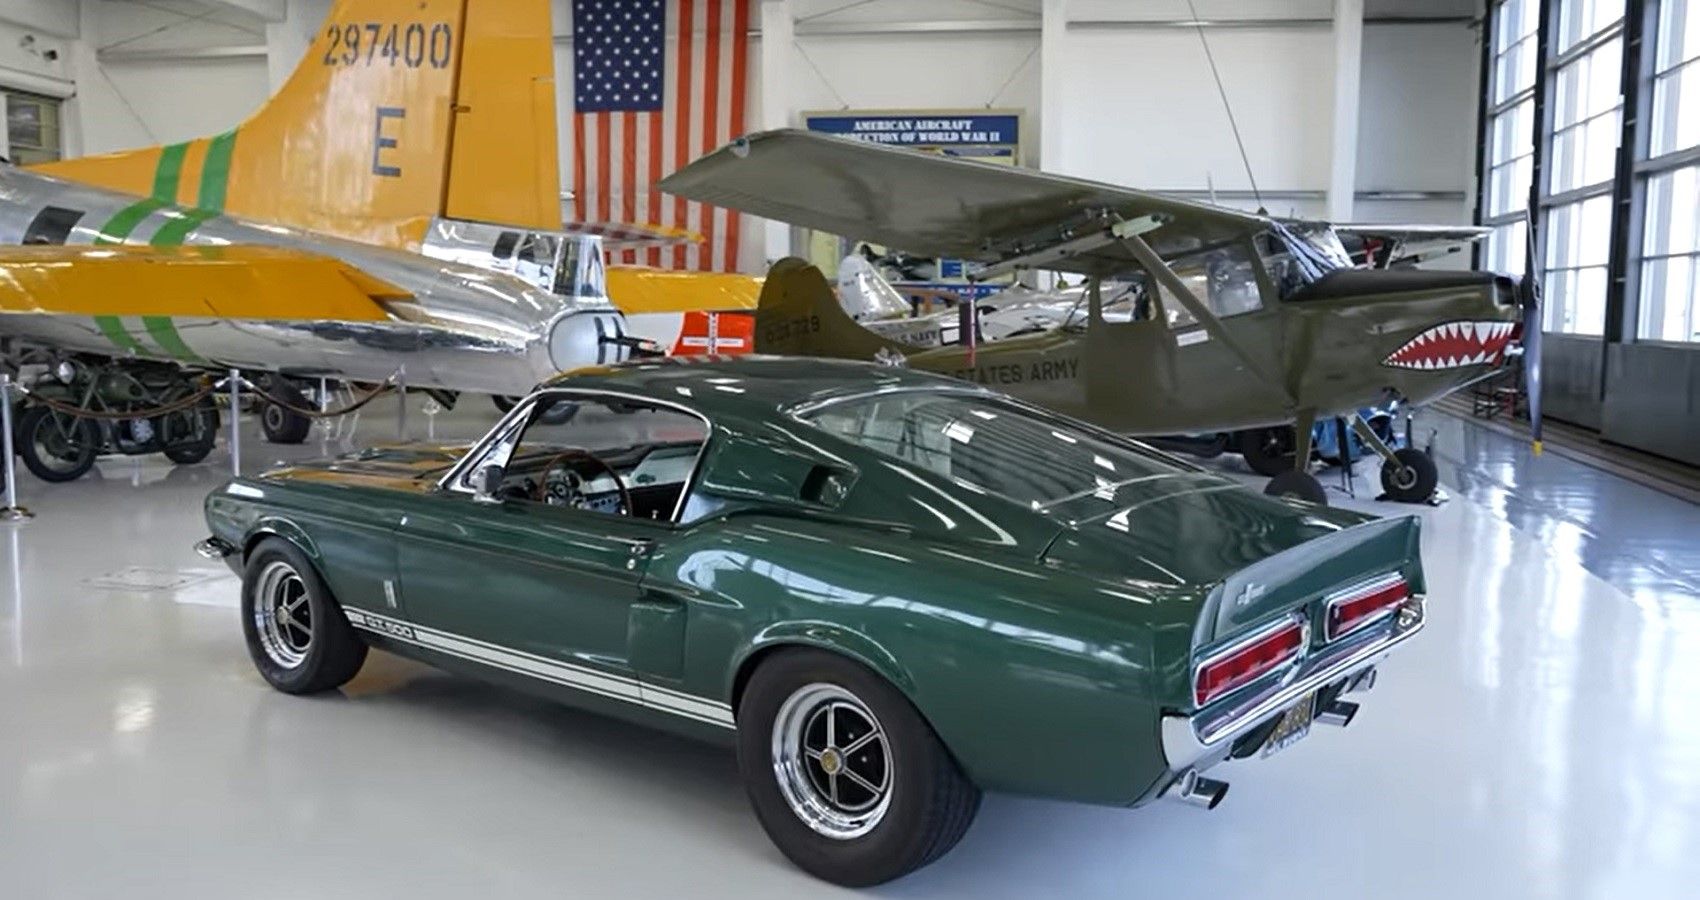 1967 Ford Shelby Mustang GT500 Twin-supercharged, rear